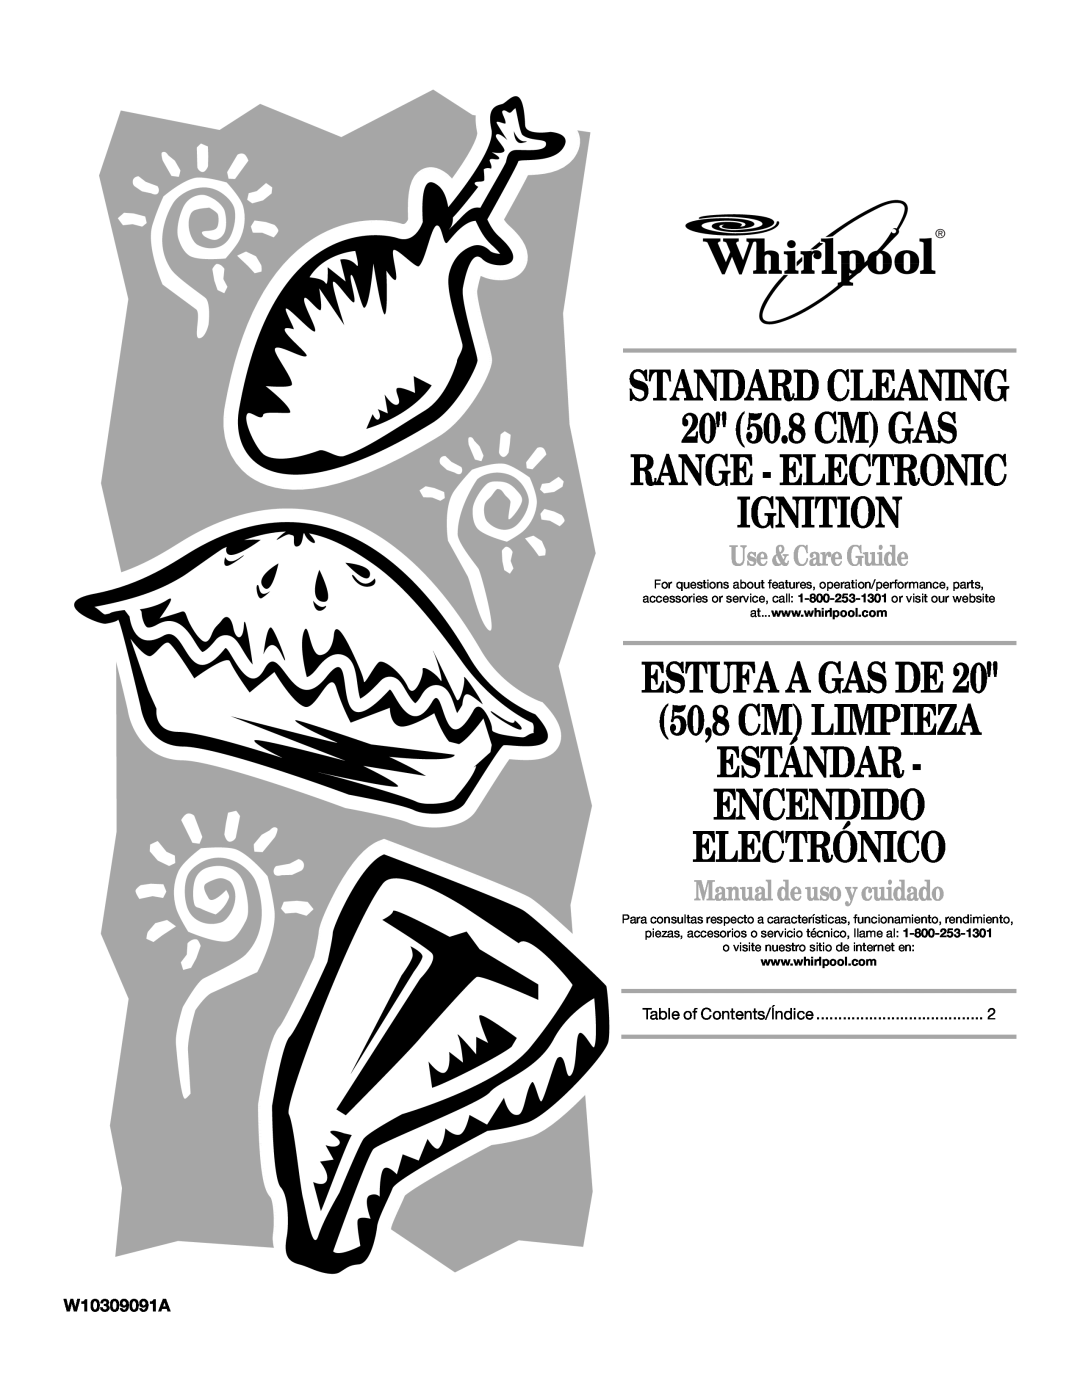 Whirlpool W10309091A manual 20 50.8 CM GAS, Ignition, Standard Cleaning, Range - Electronic, Use & Care Guide 